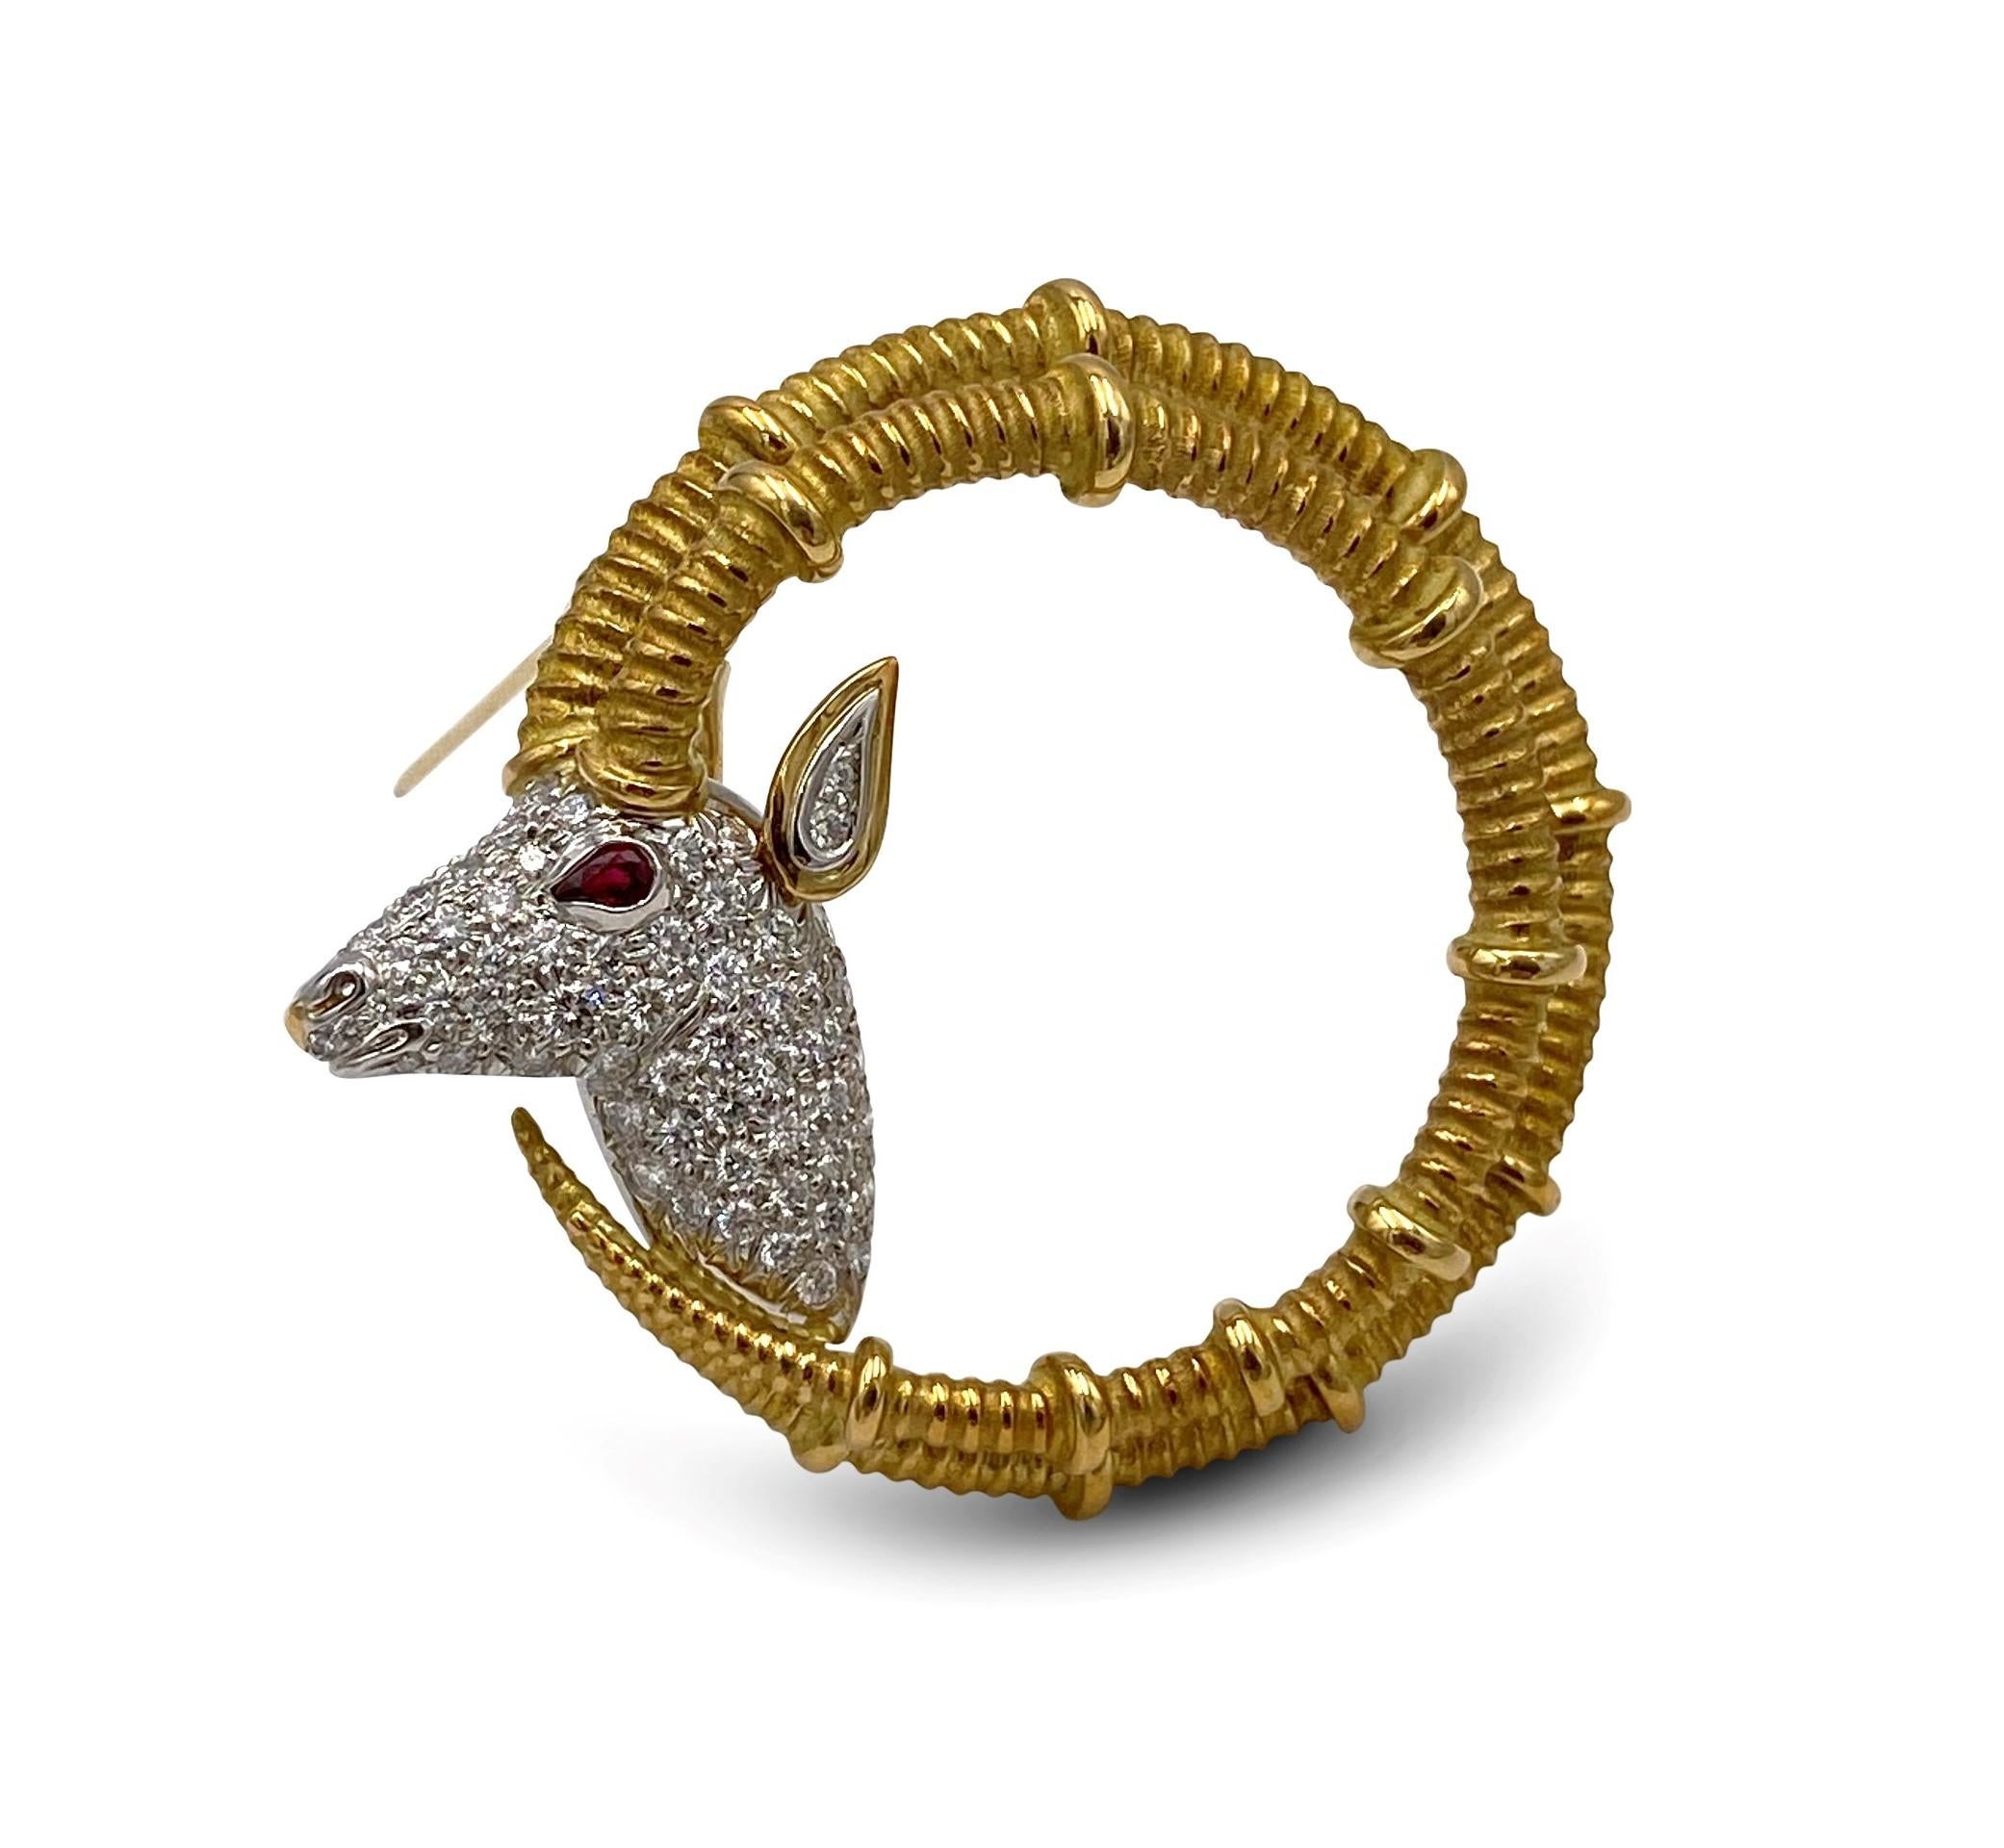 Iconic Ibex ram head pin designed by Jean Schlumberger for Tiffany & Co. The pin is crafted in 18 karat yellow gold with platinum and set with an estimated 0.80 carats of round brilliant cut diamonds (E-F color, VS clarity) and adorned with a ruby